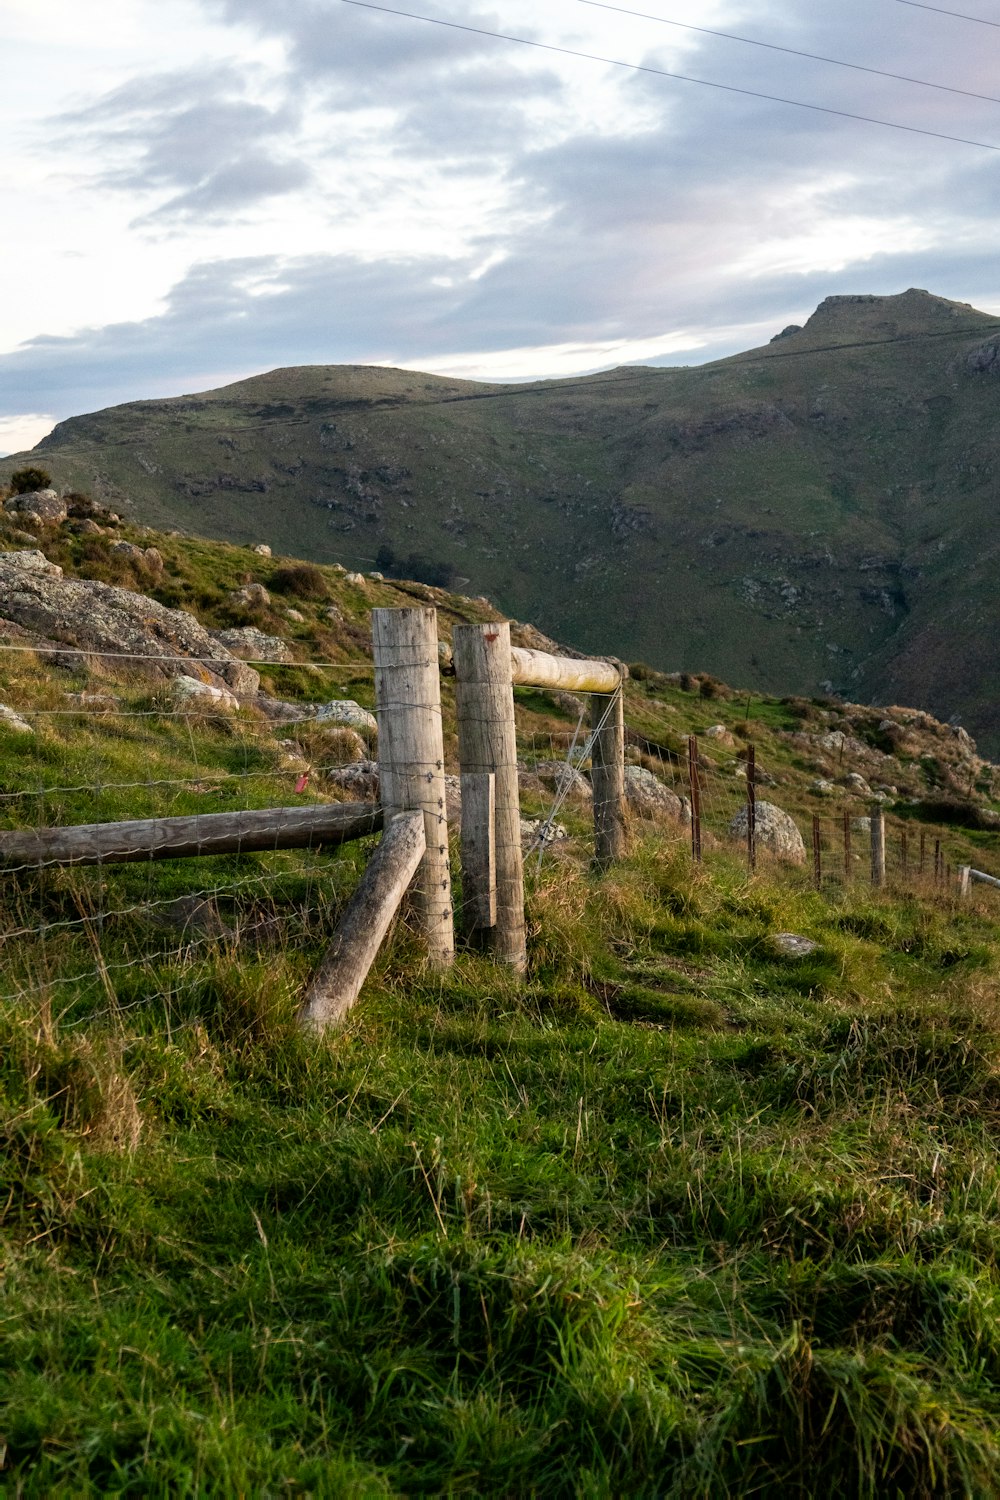 a wooden fence on a grassy hill with mountains in the background